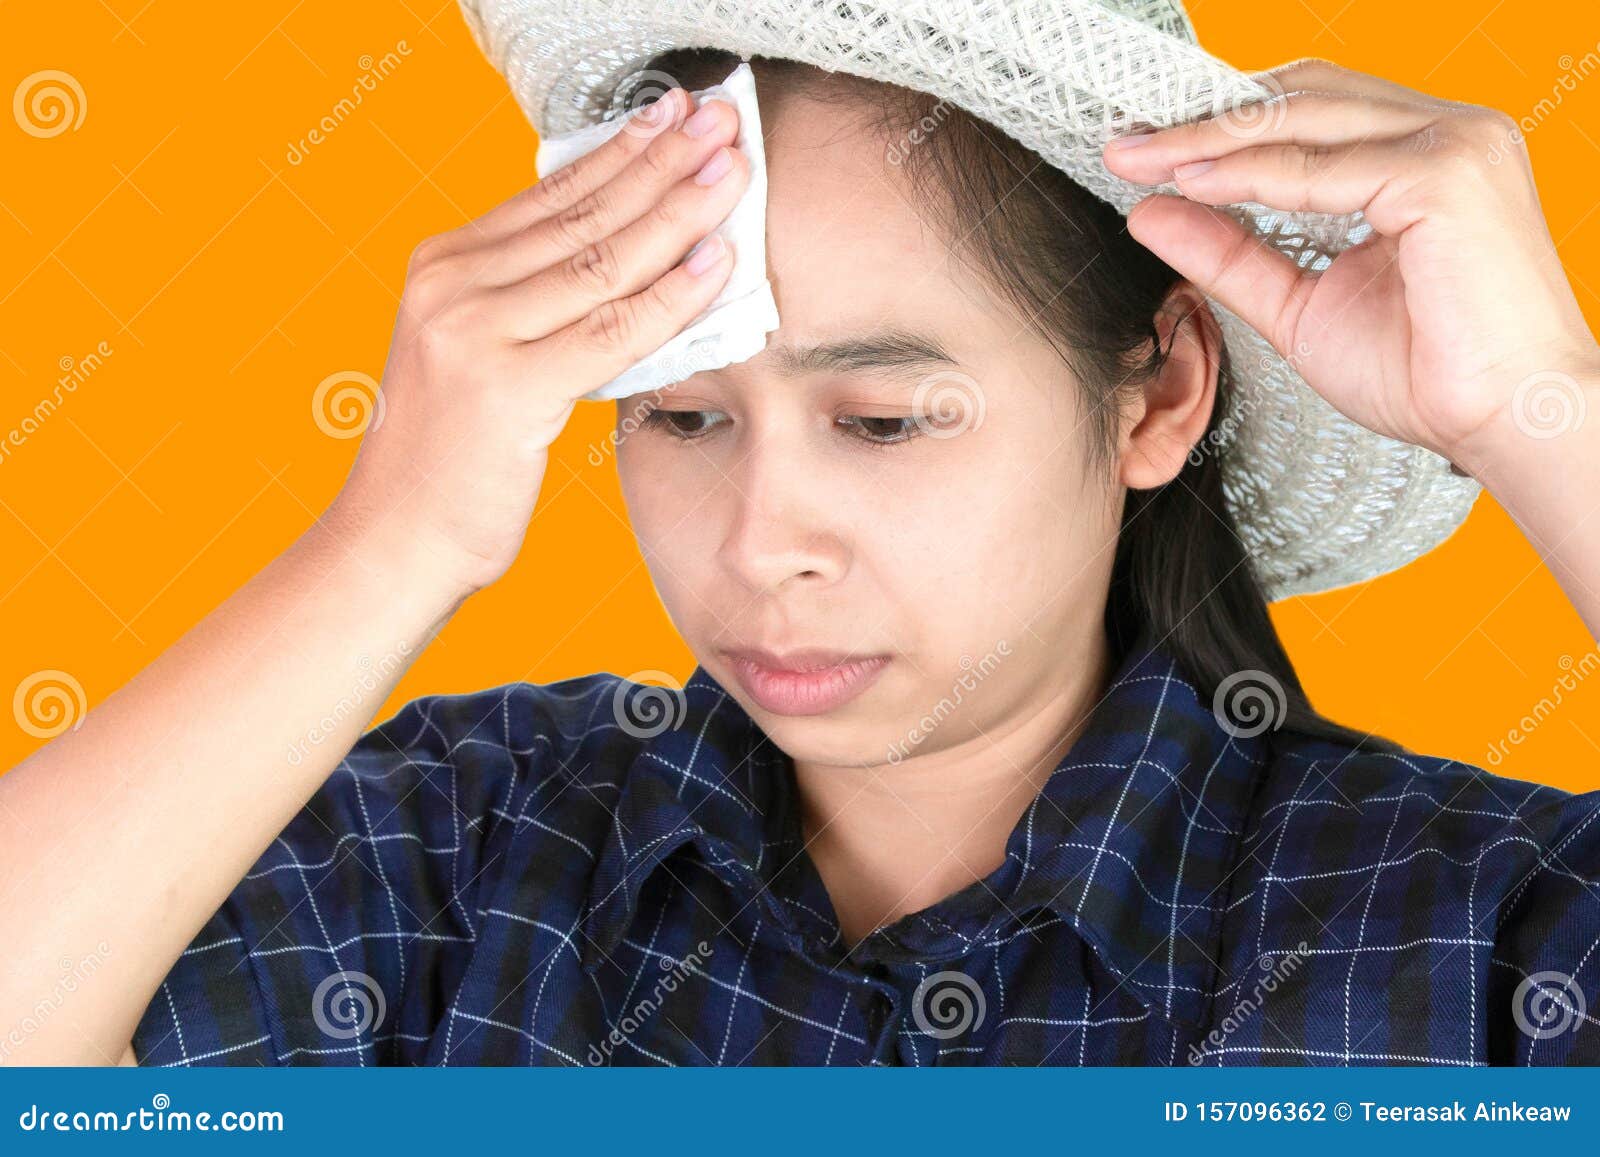 asian young woman uses a tissue to wiped the sweat on her forehead on a hot day